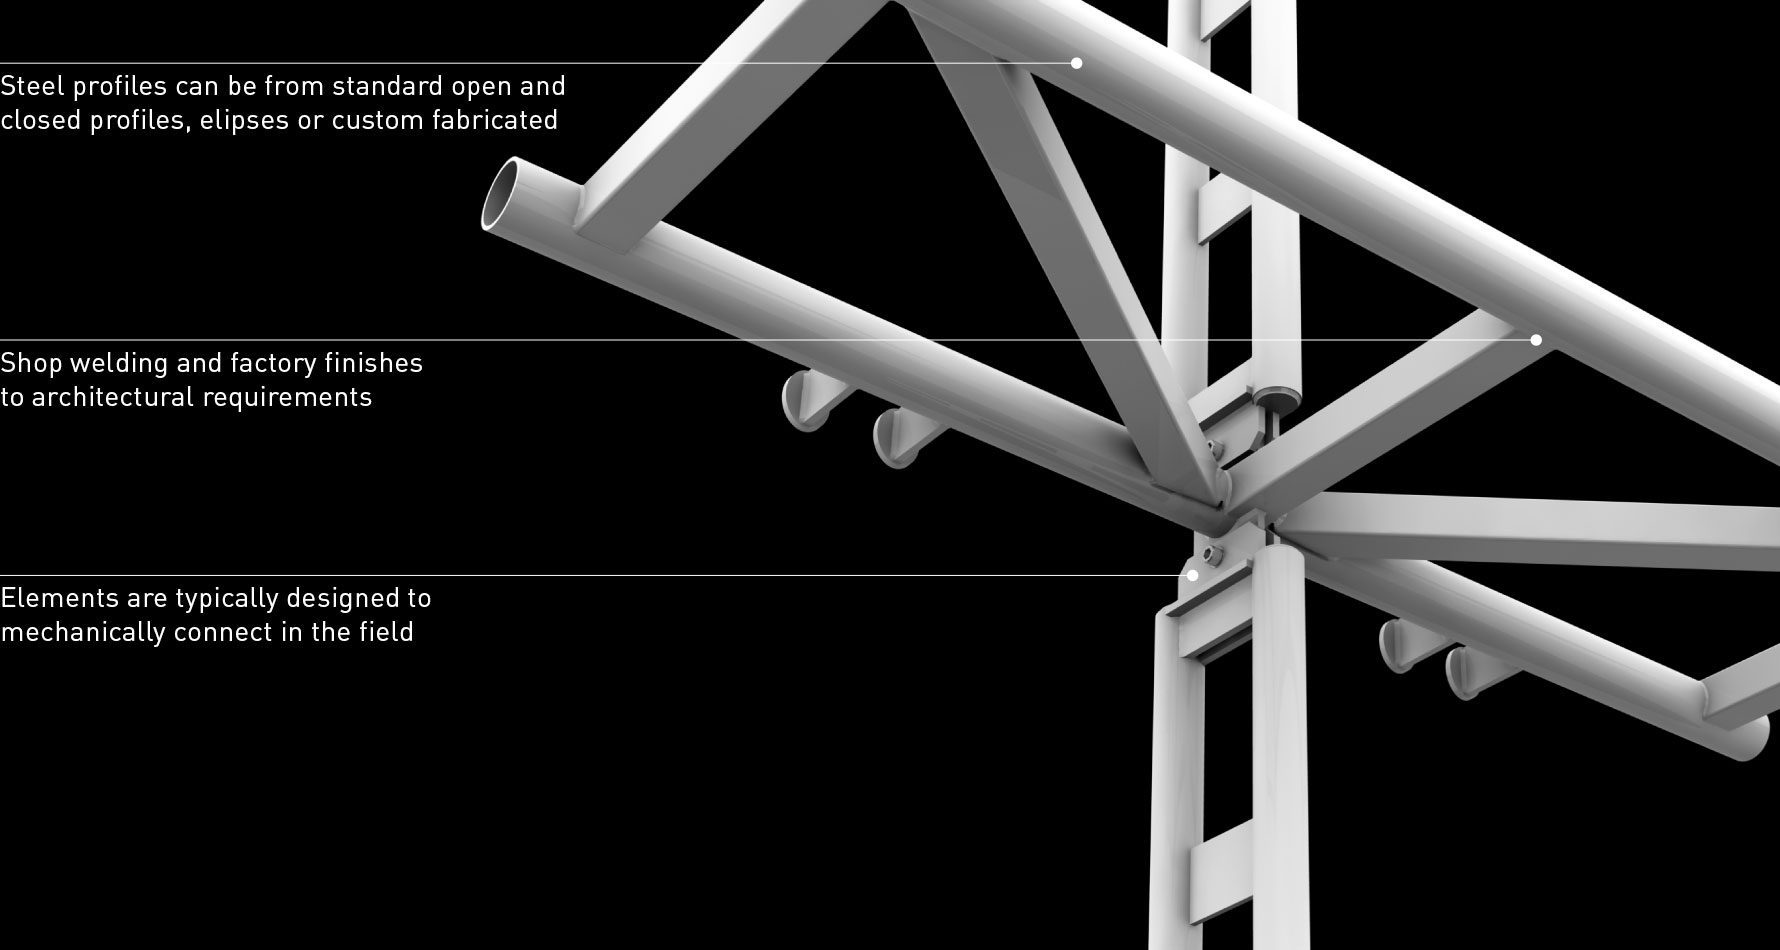 Architecturally exposed steel infographic